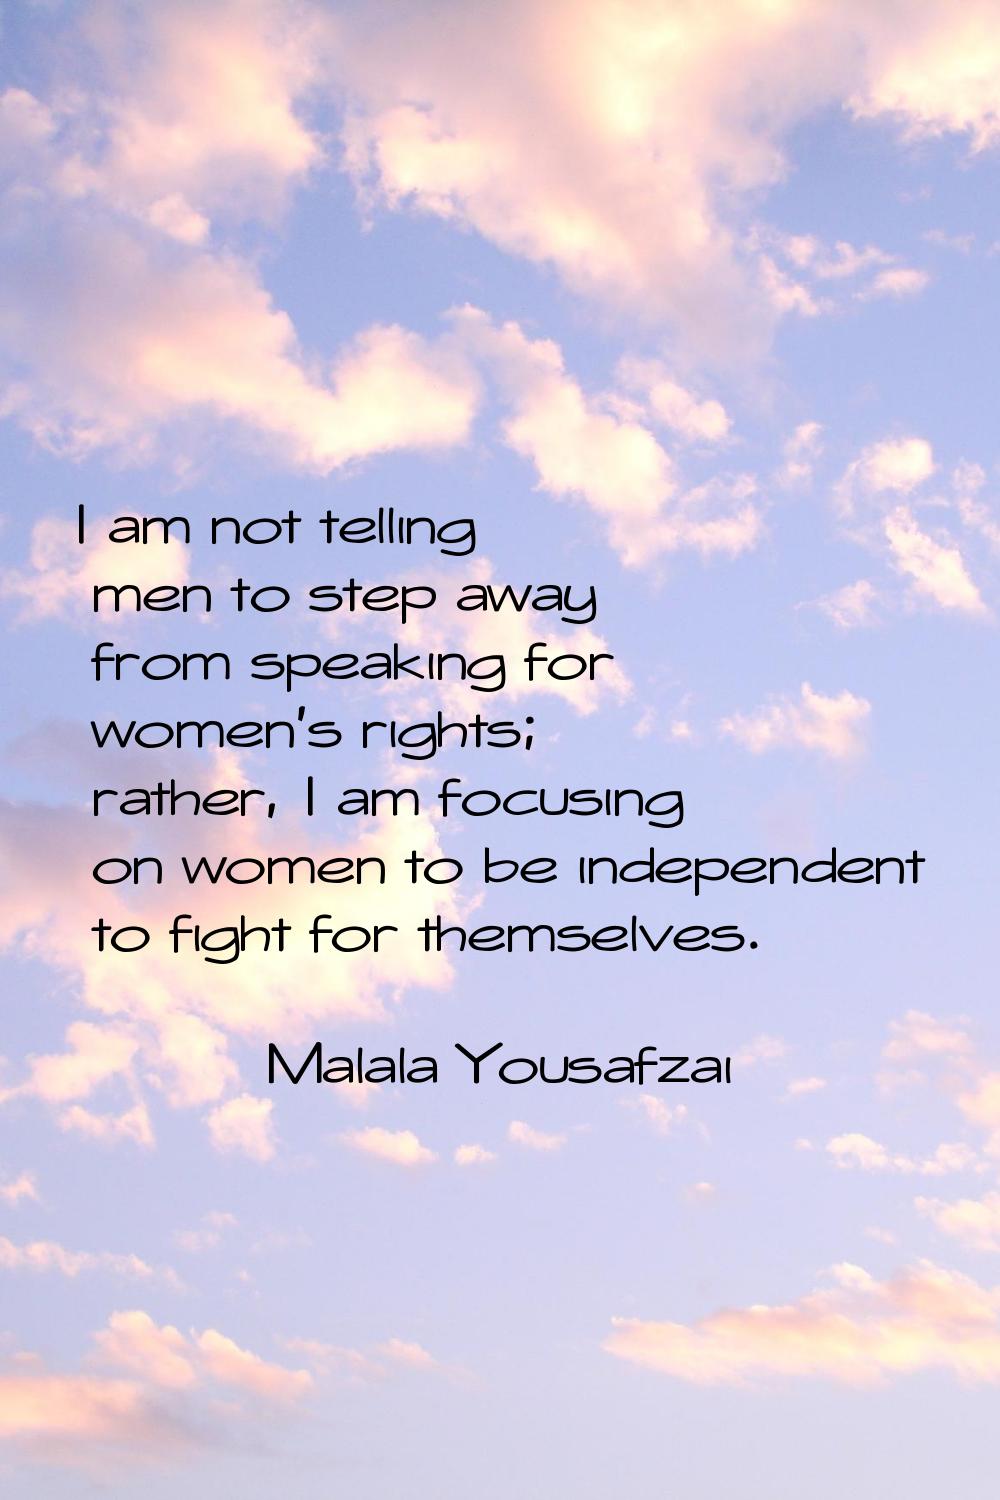 I am not telling men to step away from speaking for women's rights; rather, I am focusing on women 